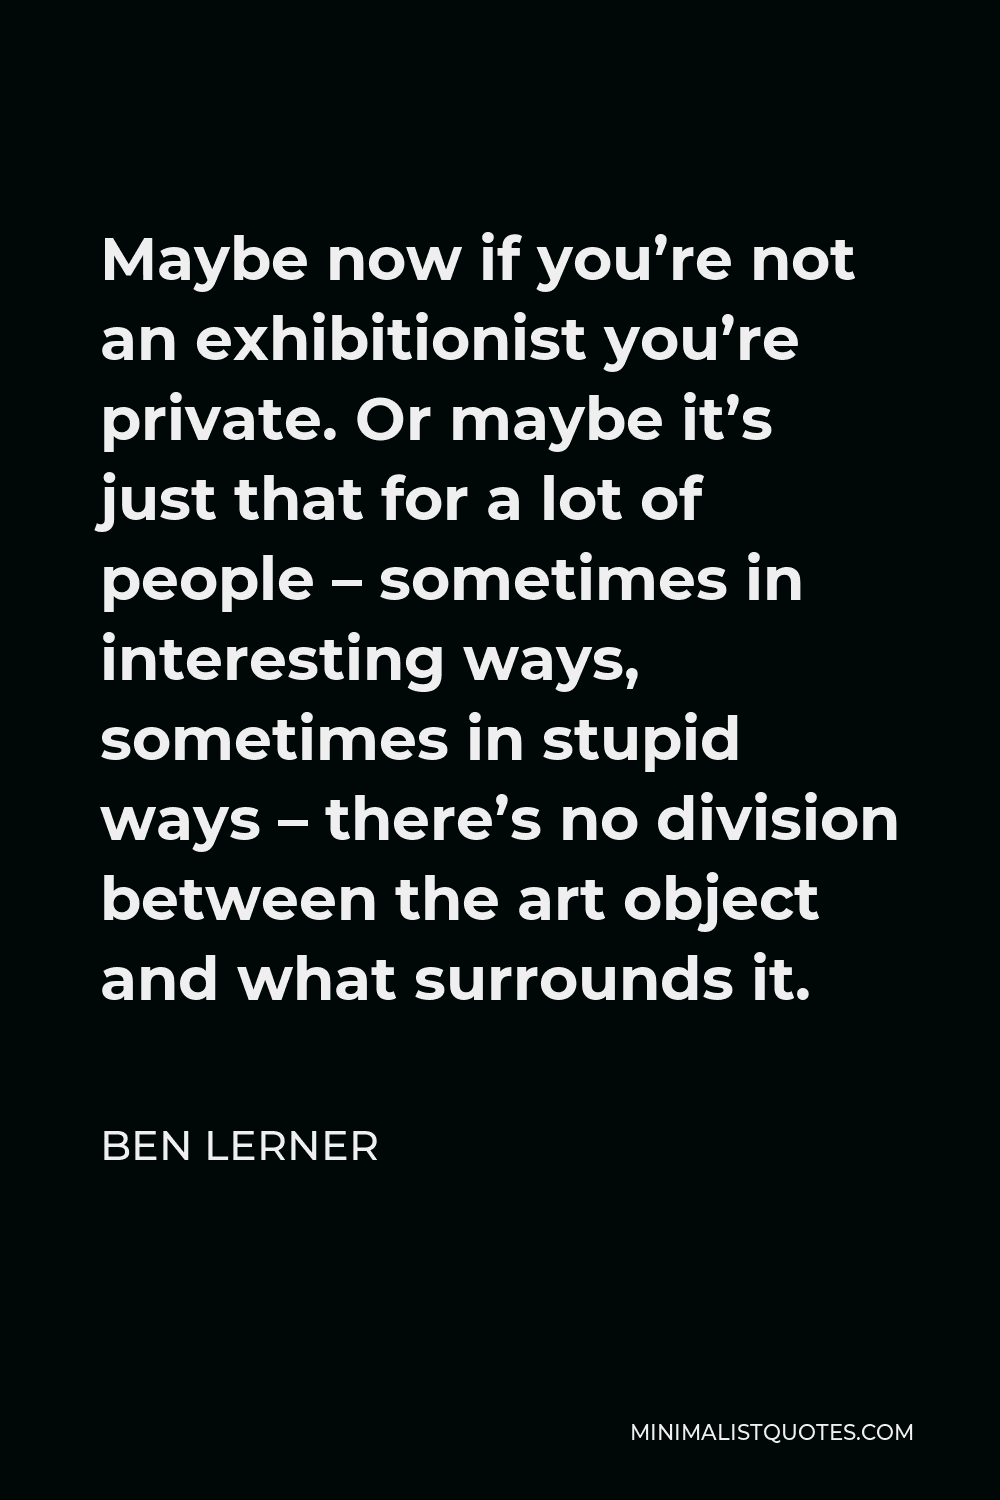 Ben Lerner Quote - Maybe now if you’re not an exhibitionist you’re private. Or maybe it’s just that for a lot of people – sometimes in interesting ways, sometimes in stupid ways – there’s no division between the art object and what surrounds it.